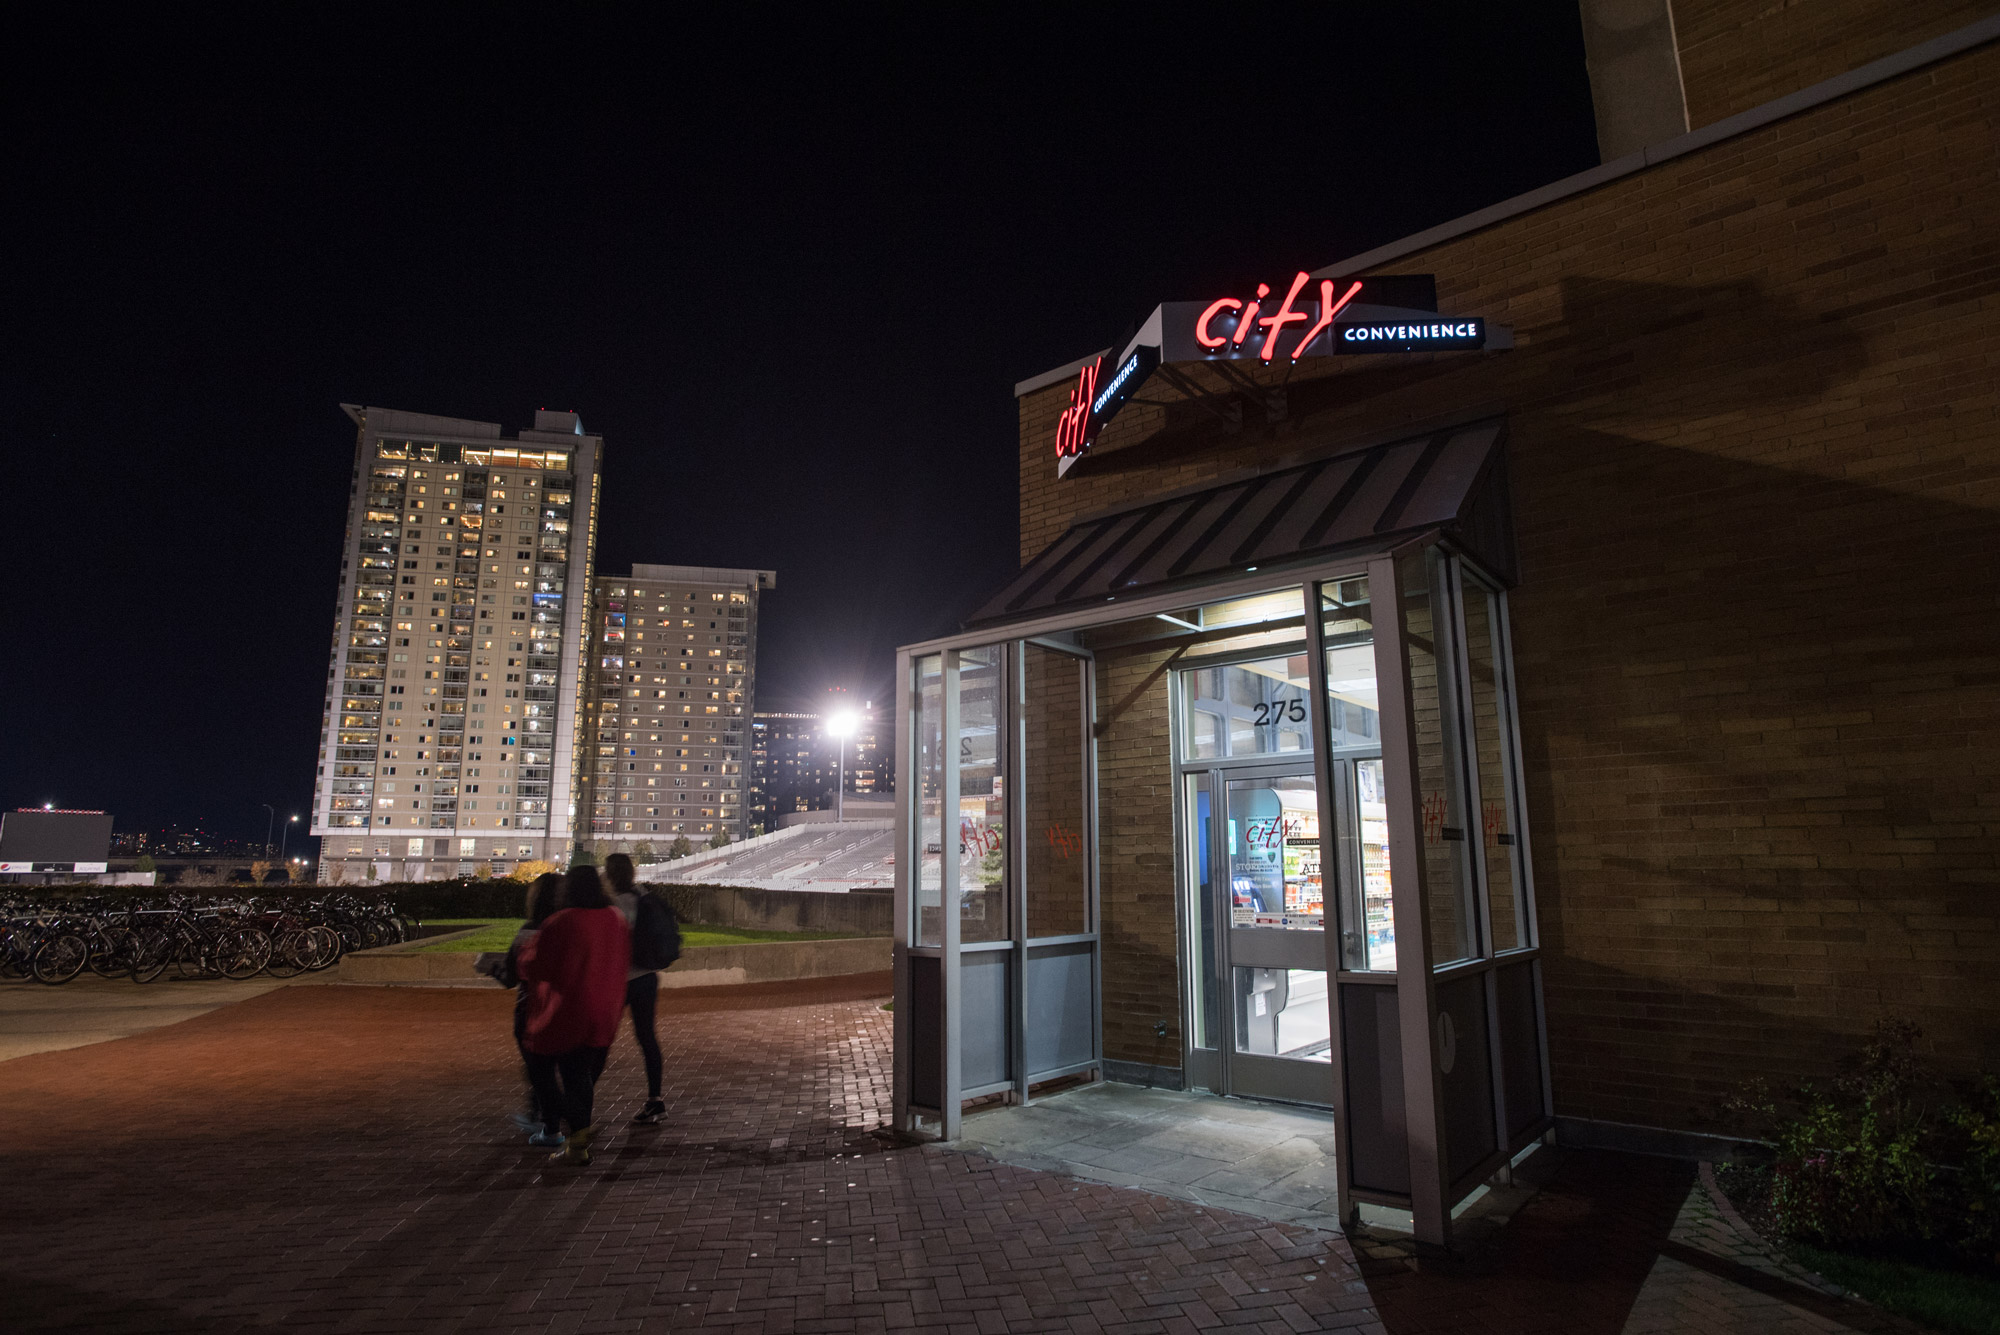 people walk out of City Convenience late at night